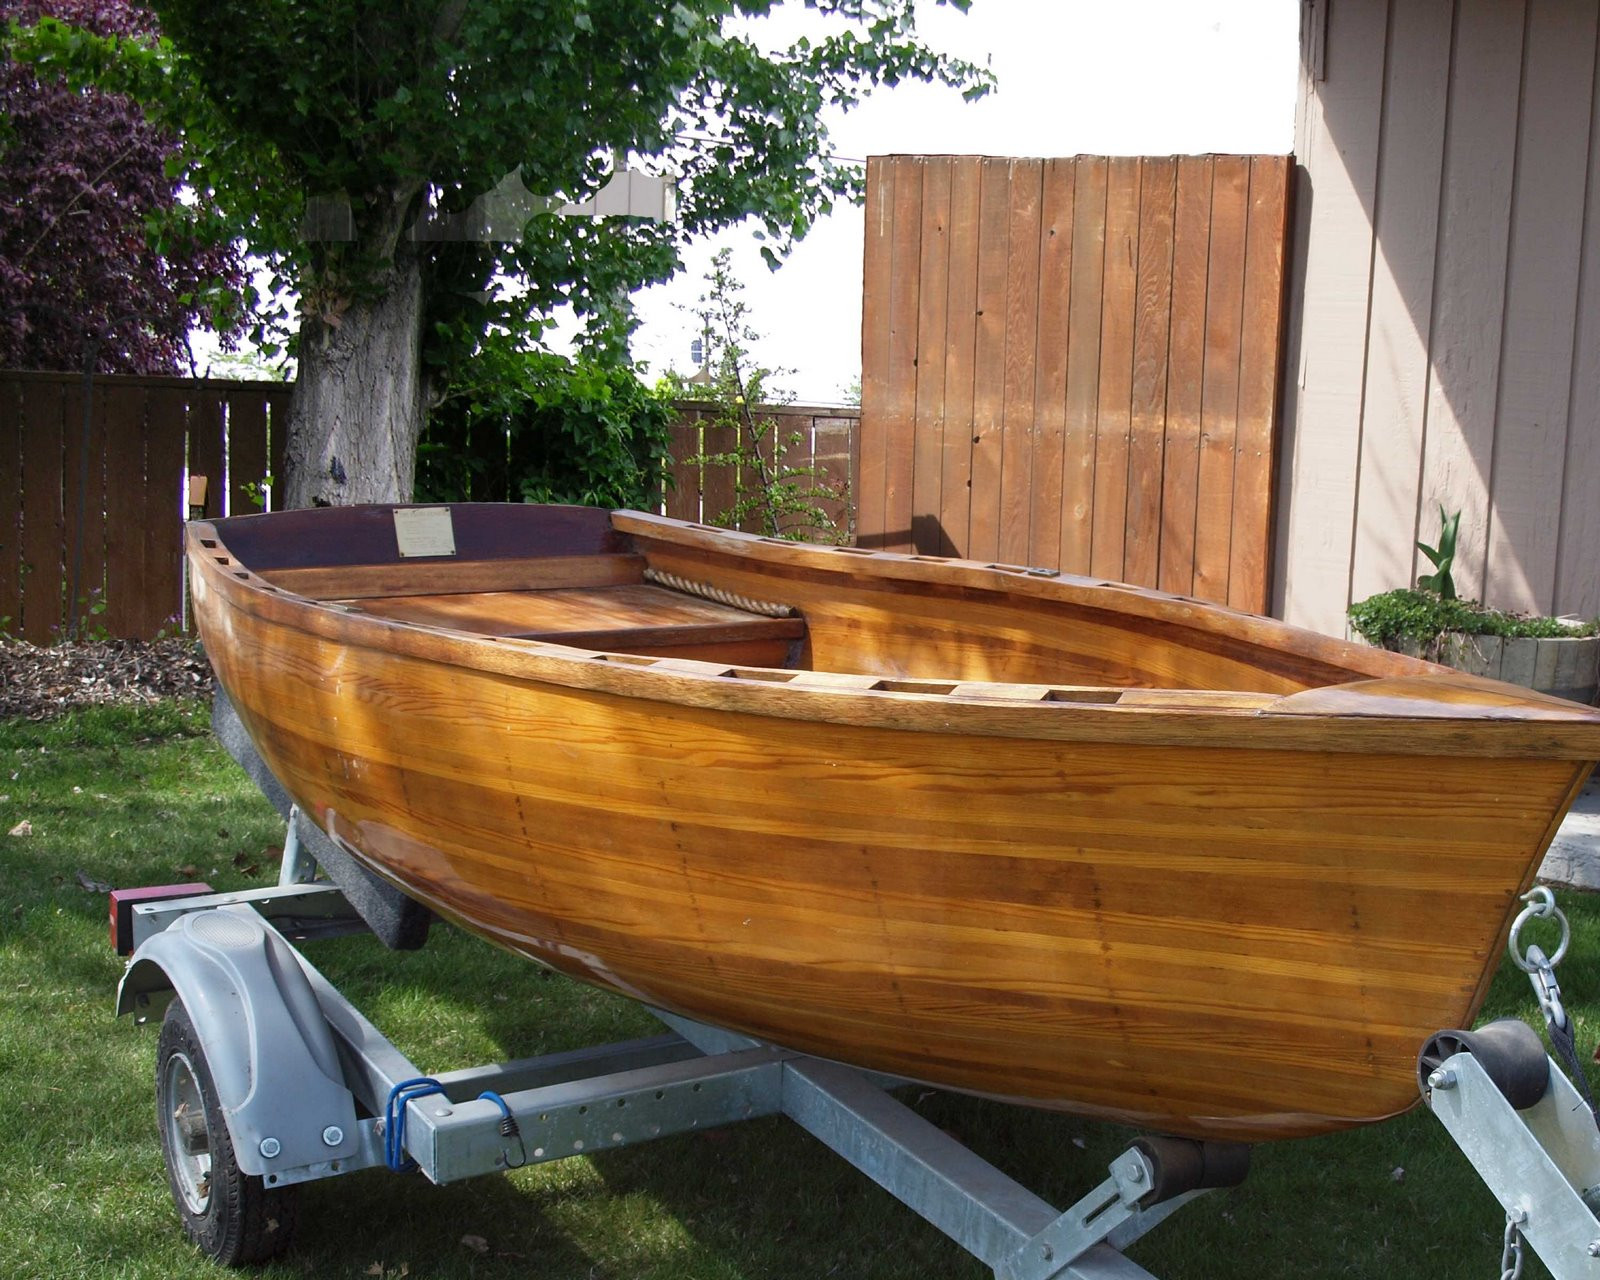 DIY Boat Kits
 Jay Wooden Rowing Boat Diy Kits For Sale How to Building